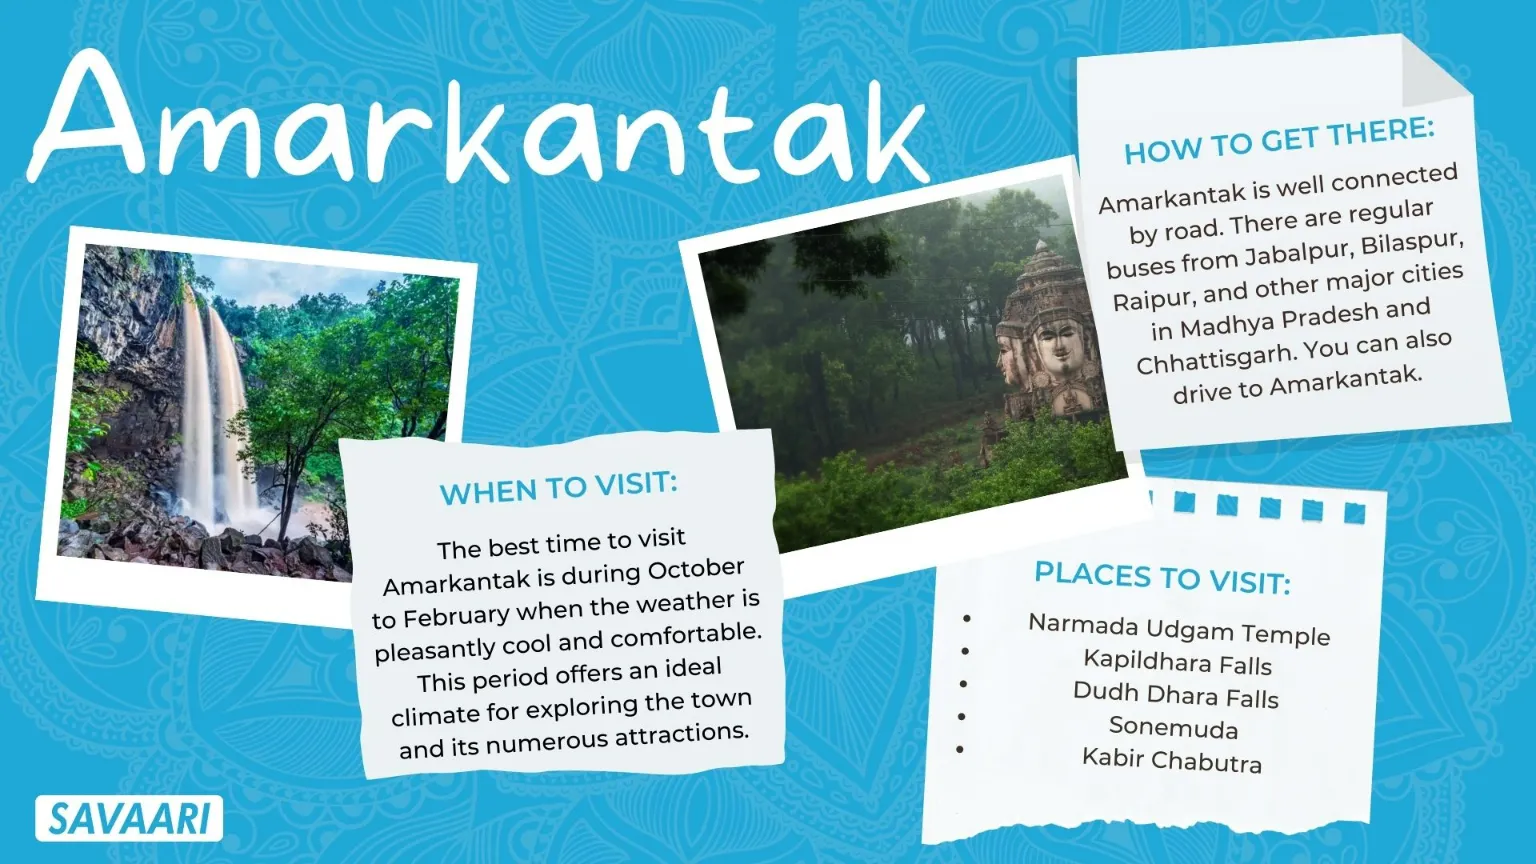 Things to do in Amarkantak